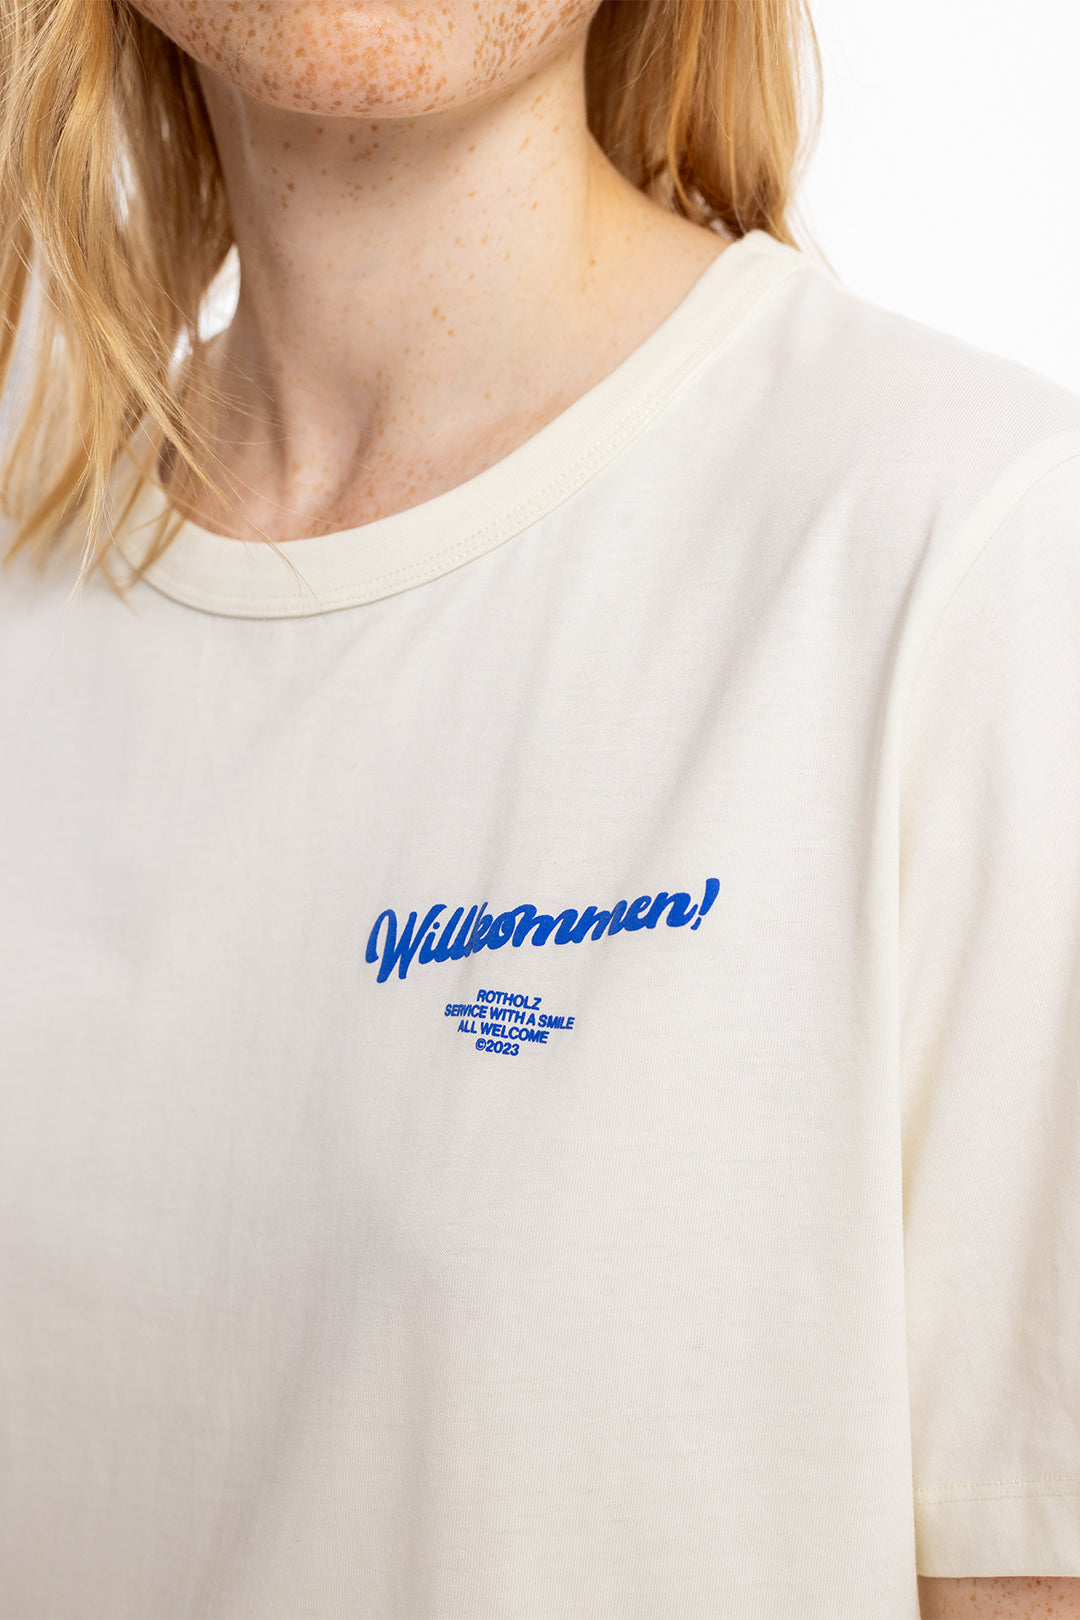 White T-shirt welcome print made from 100% organic cotton from Rotholz